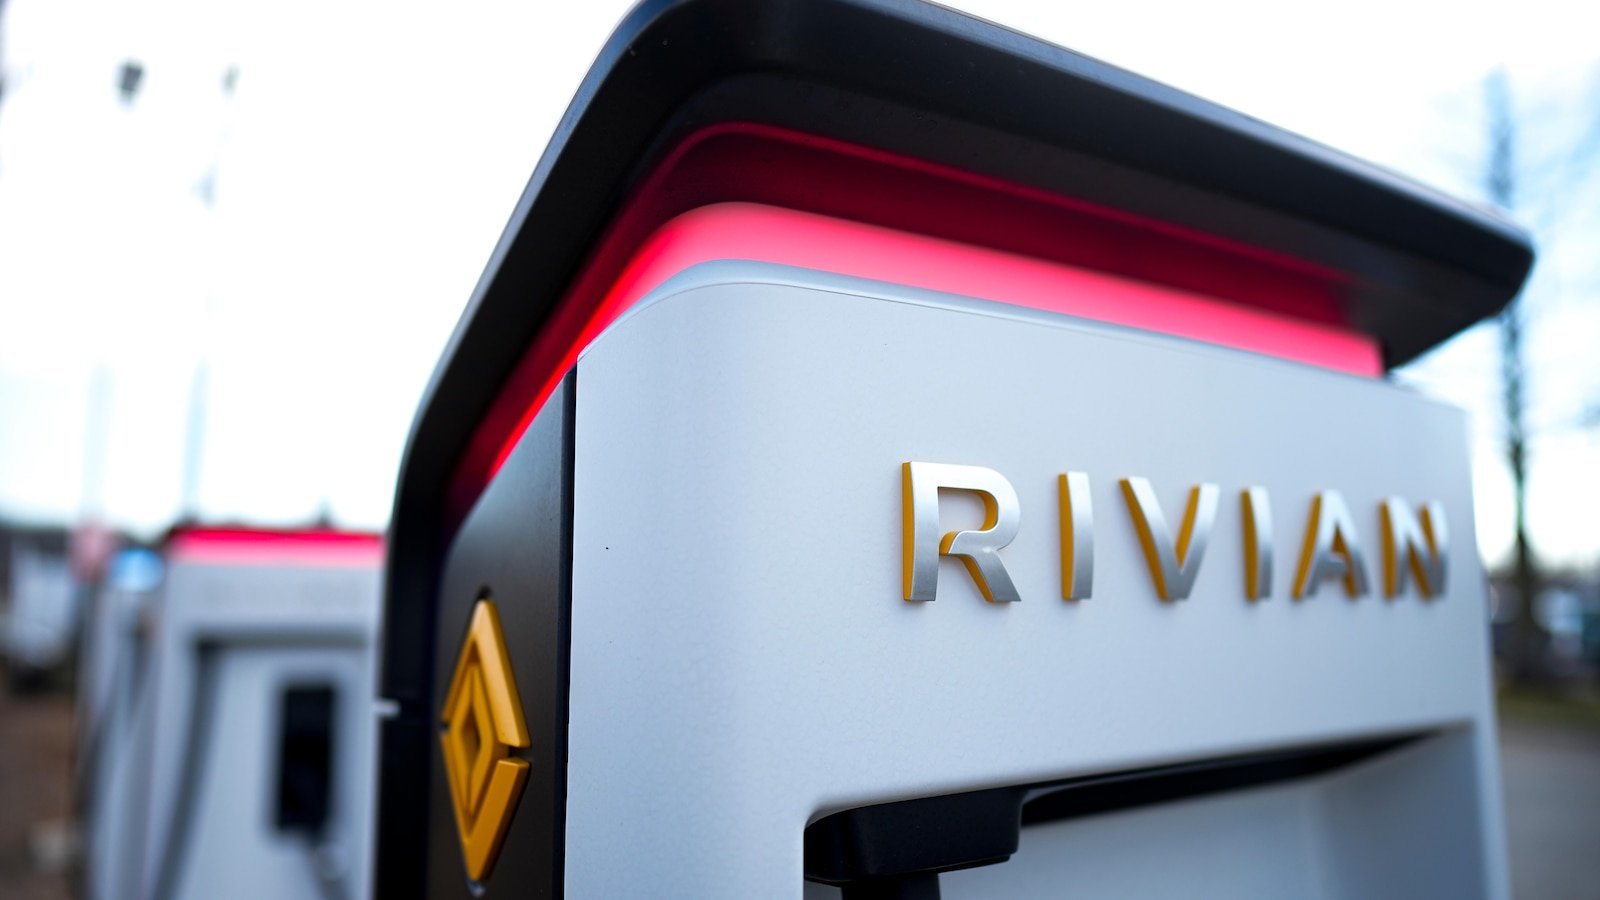 Rivian shares soar on massive cash injection from Volkswagen, starting immediately with $1 billion